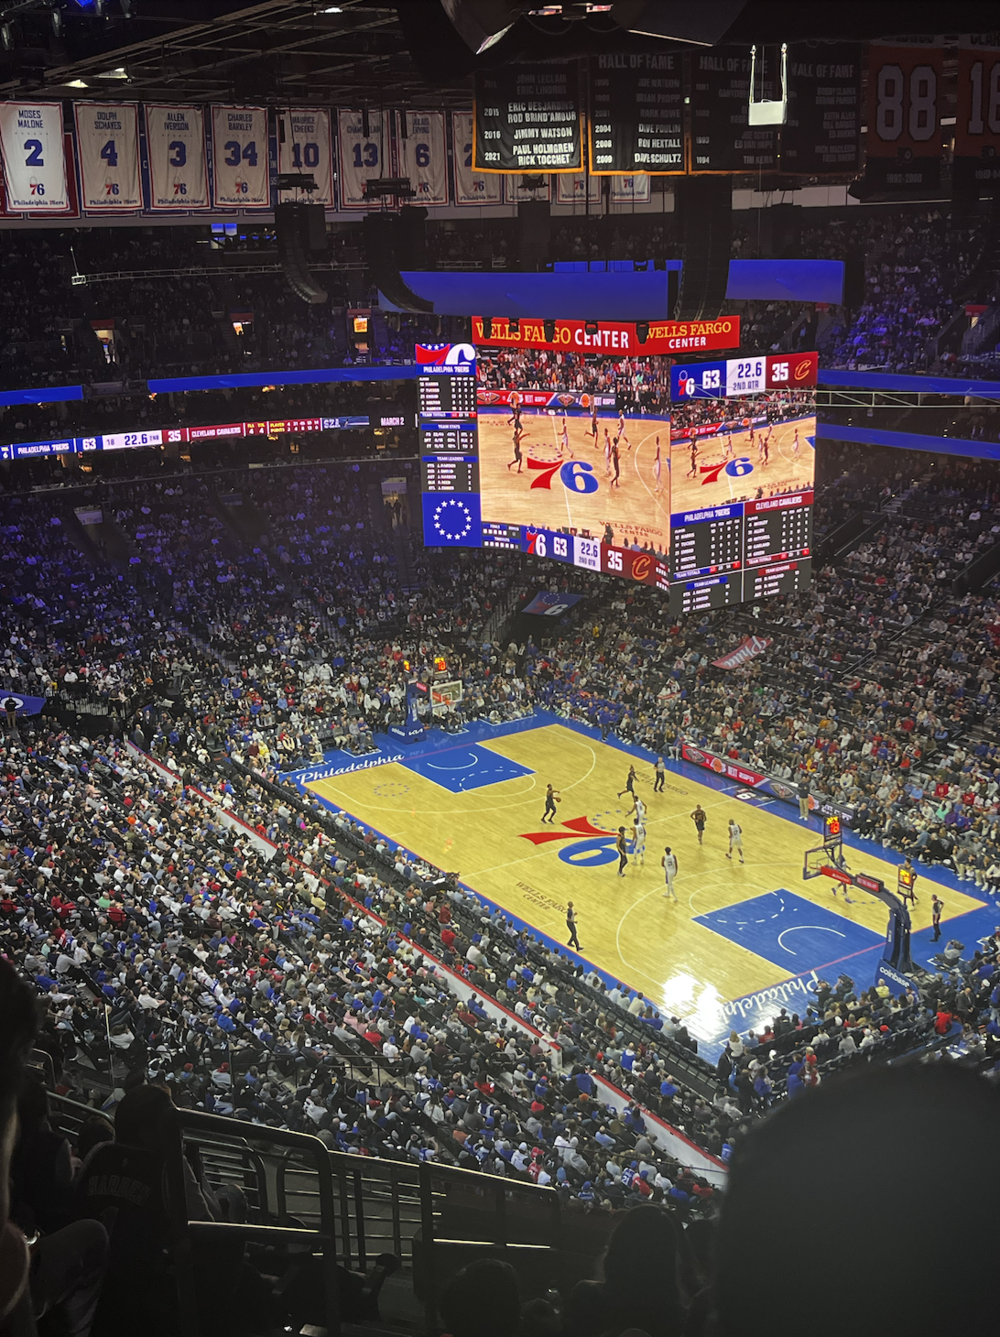 Wells Fargo Center: What you need to know to make it a great day